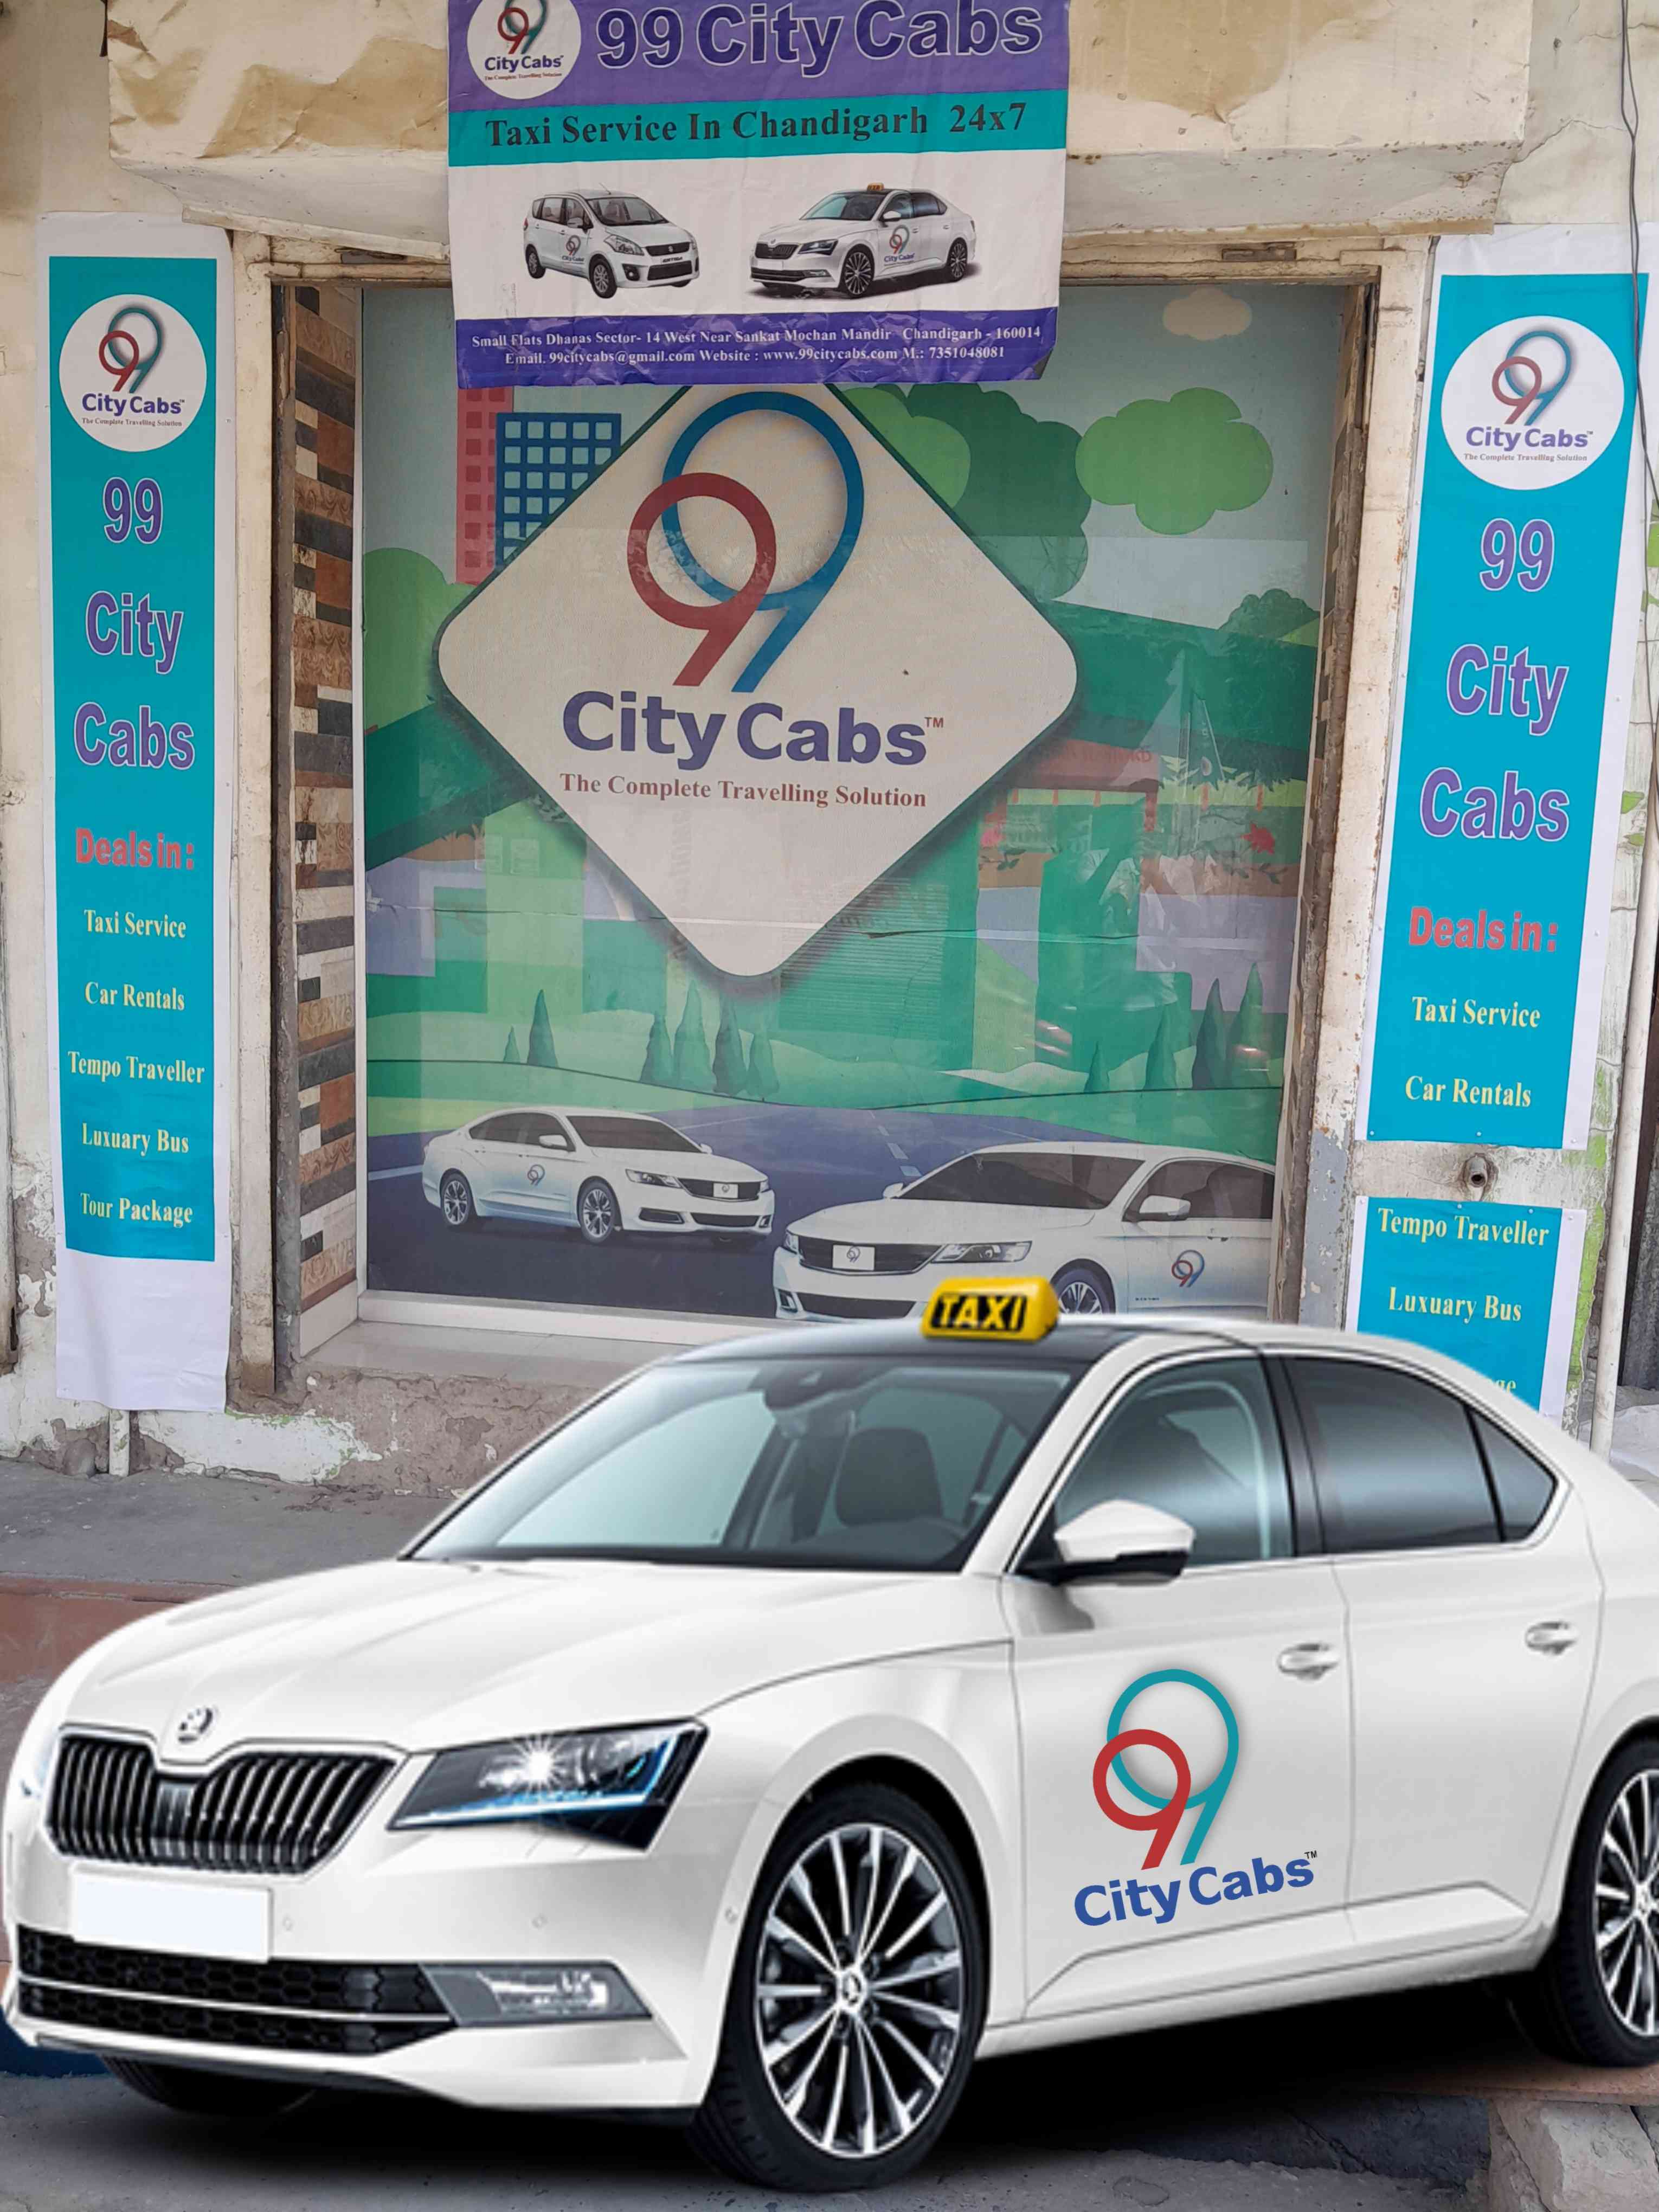 ss99 City Cabs Taxi Service in Chandigarh